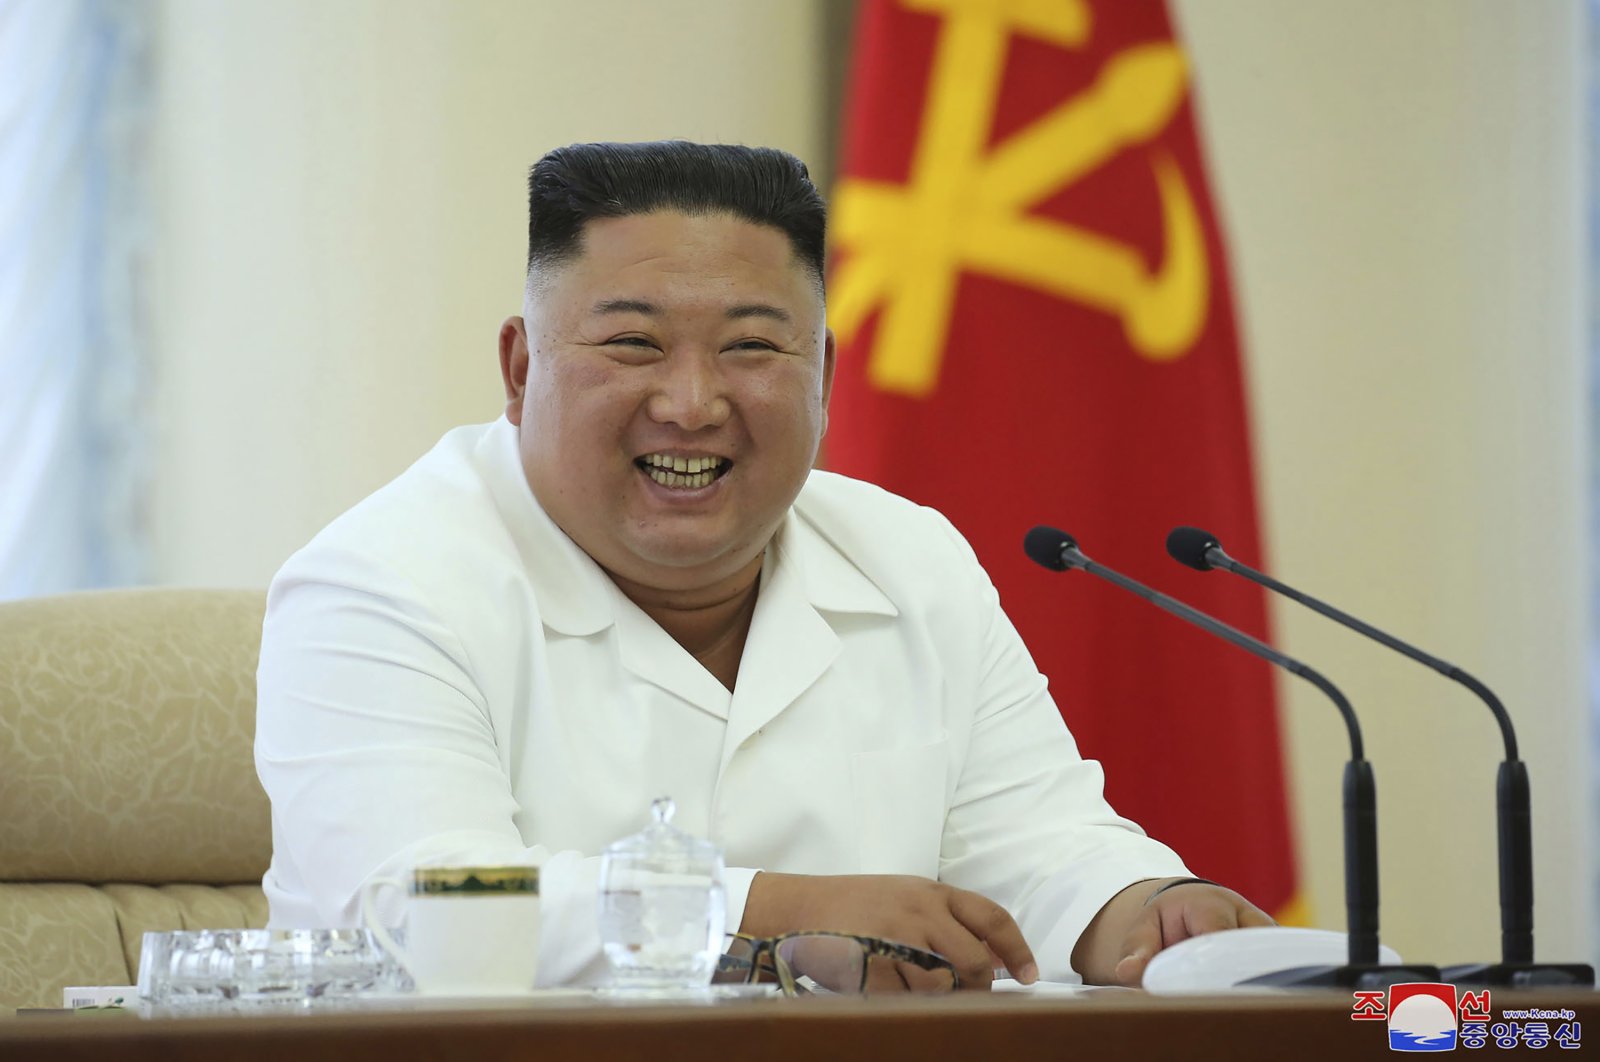 In this photo provided by the North Korean government, North Korean leader Kim Jong Un attends a meeting of the Politburo of the Central Committee of the Workers' Party of Korea in North Korea, June 7, 2020. (AP Photo)